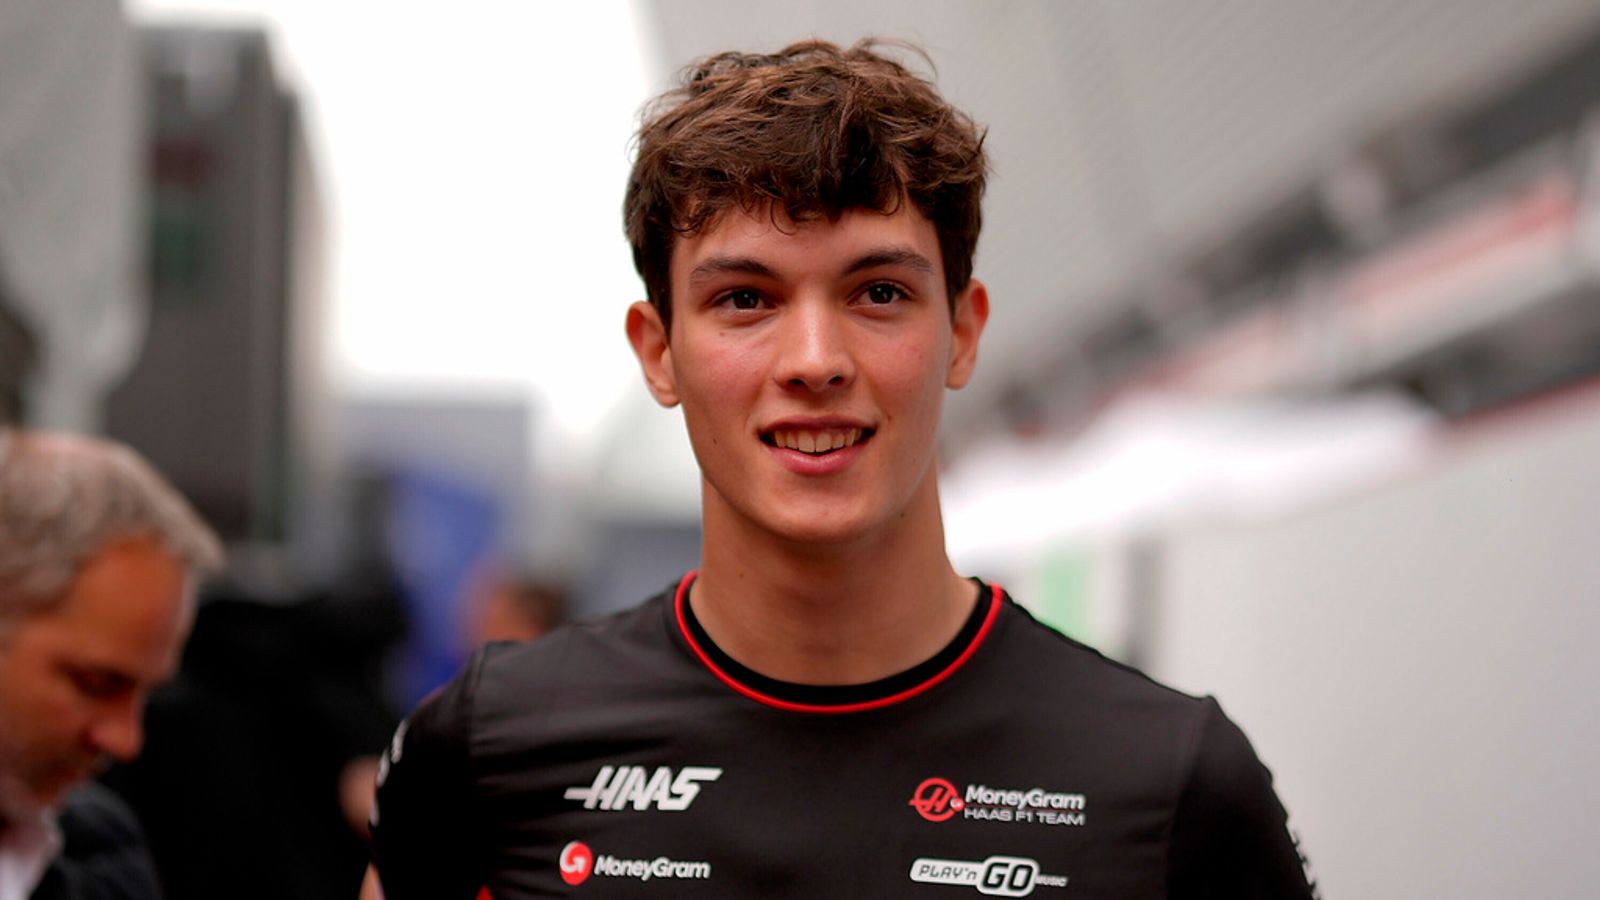 Oliver Bearman: Britain's youngest Formula One driver to race full-time with Haas next year